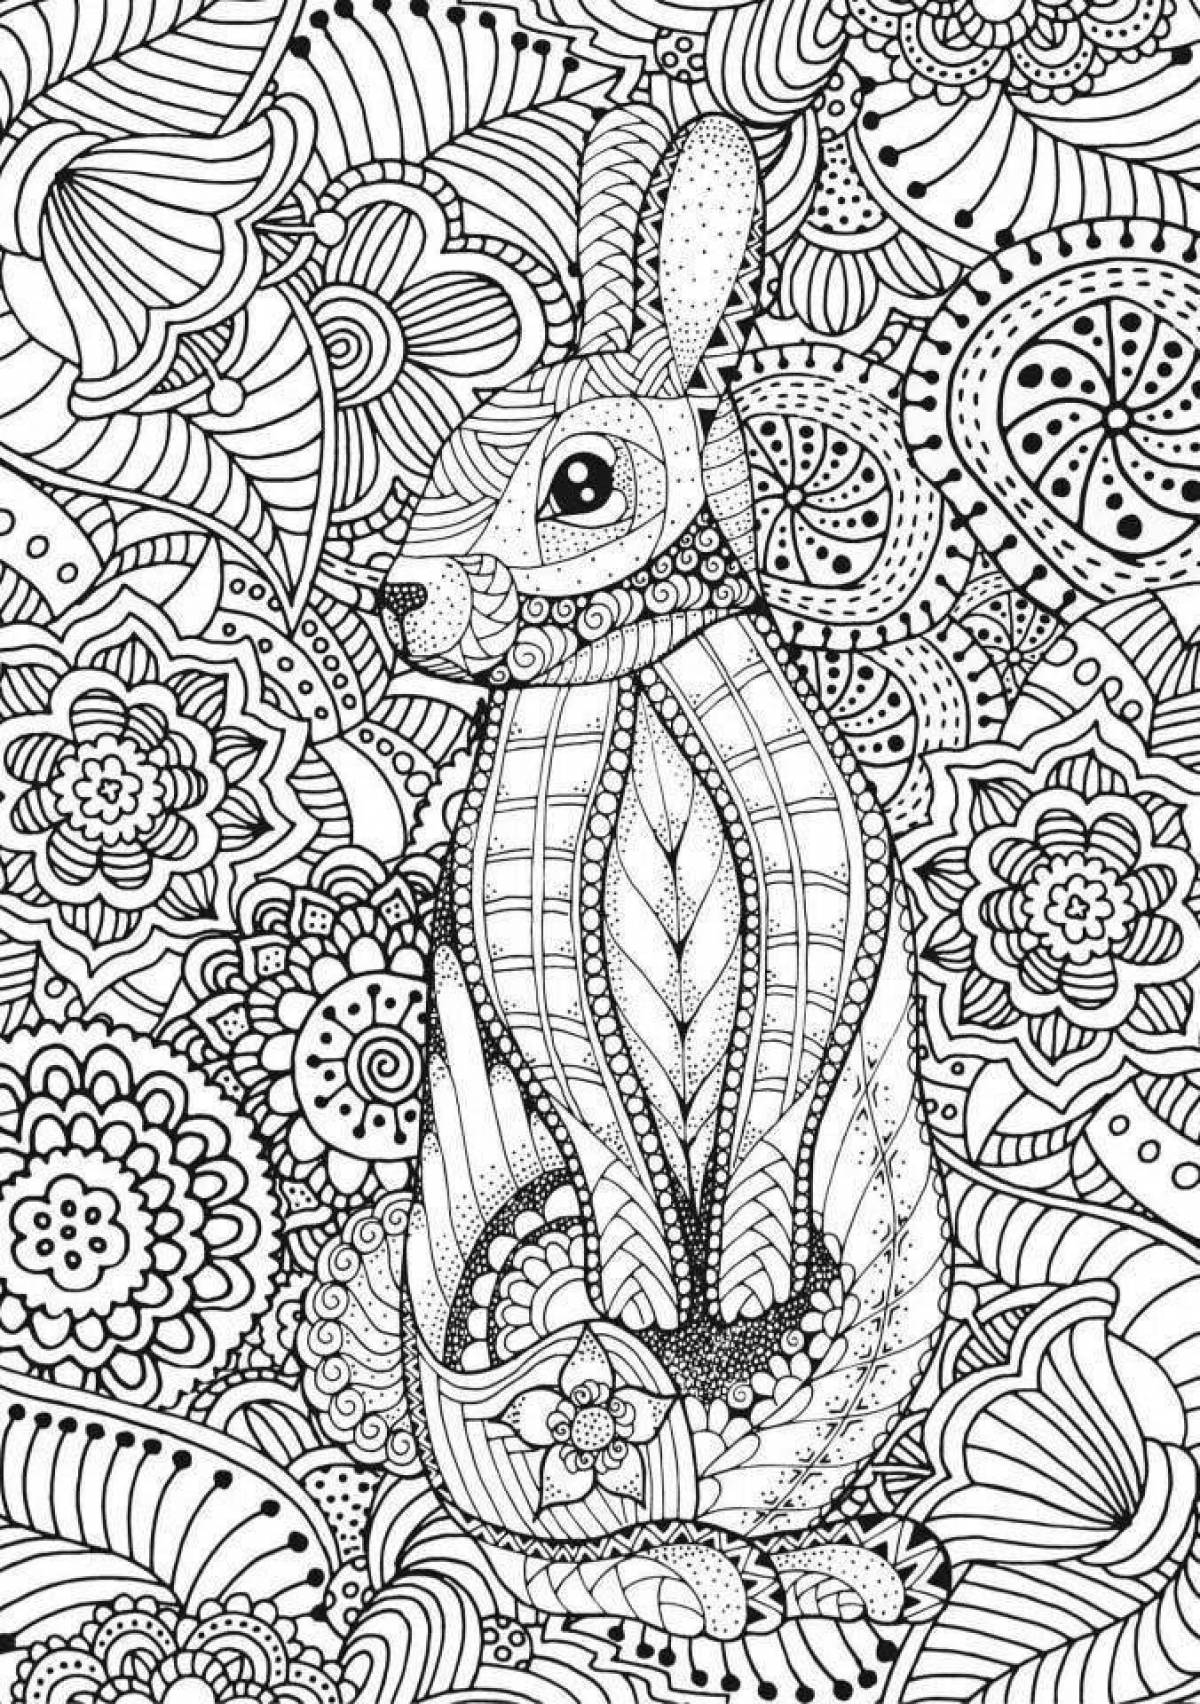 Magic coloring book to relieve stress